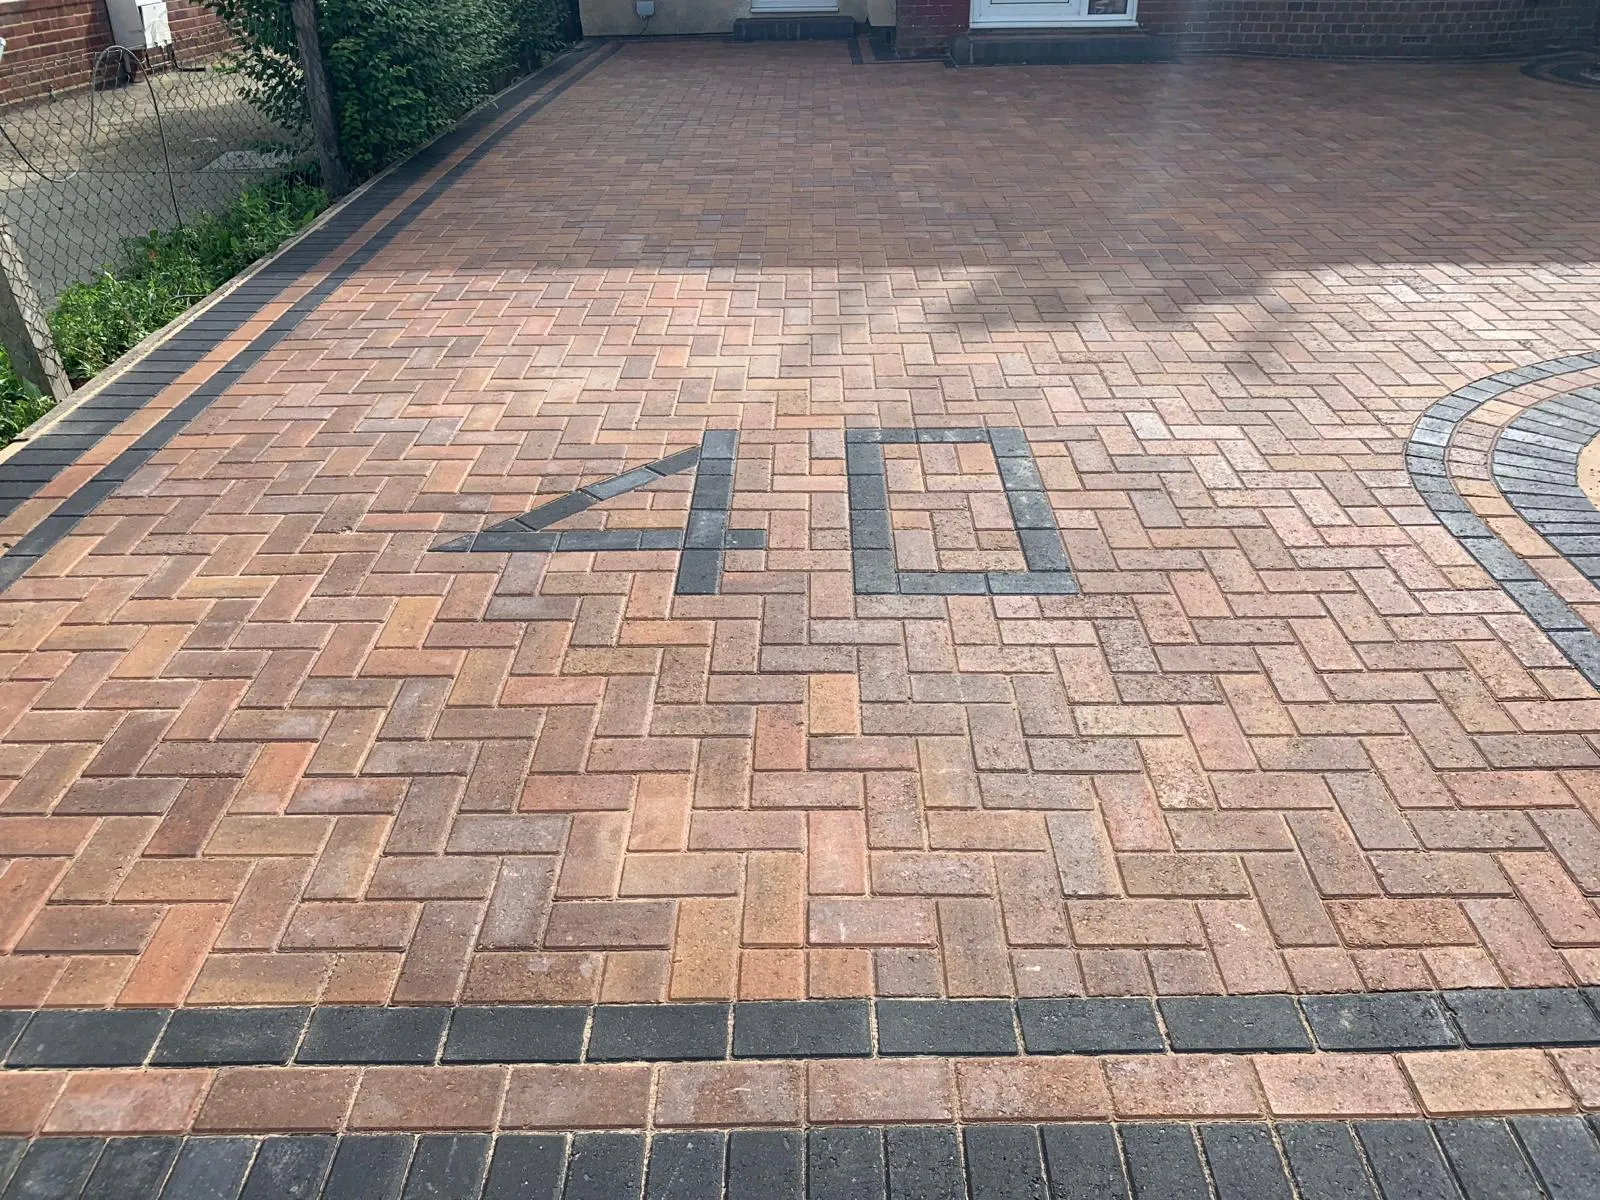 A brick driveway with a clock on it.